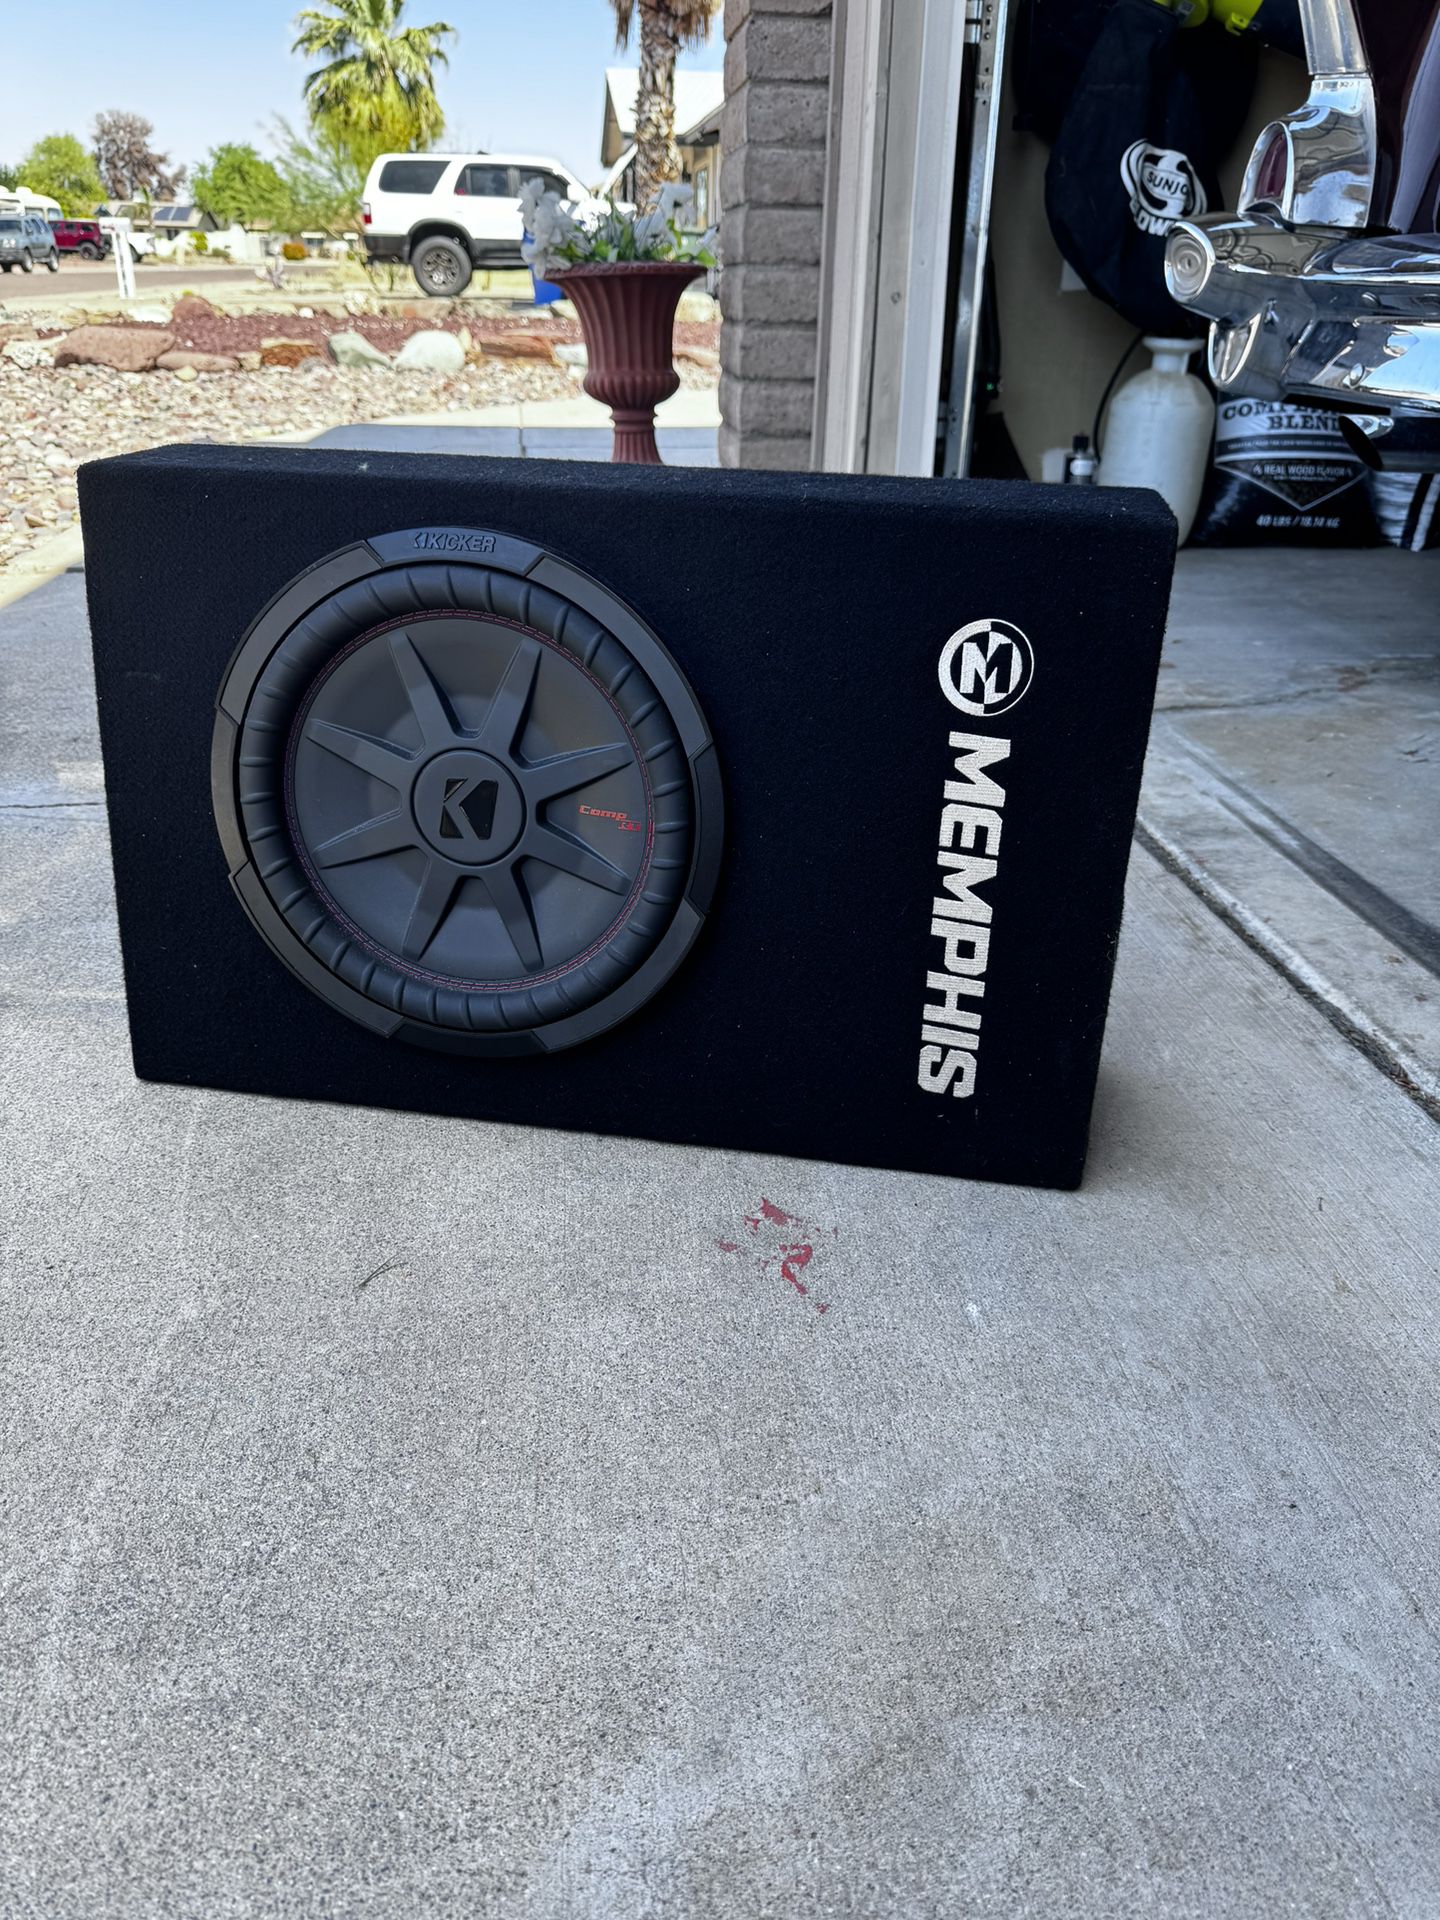 12 Inch Kicker Subwoofer With Memphis built-in amplifier